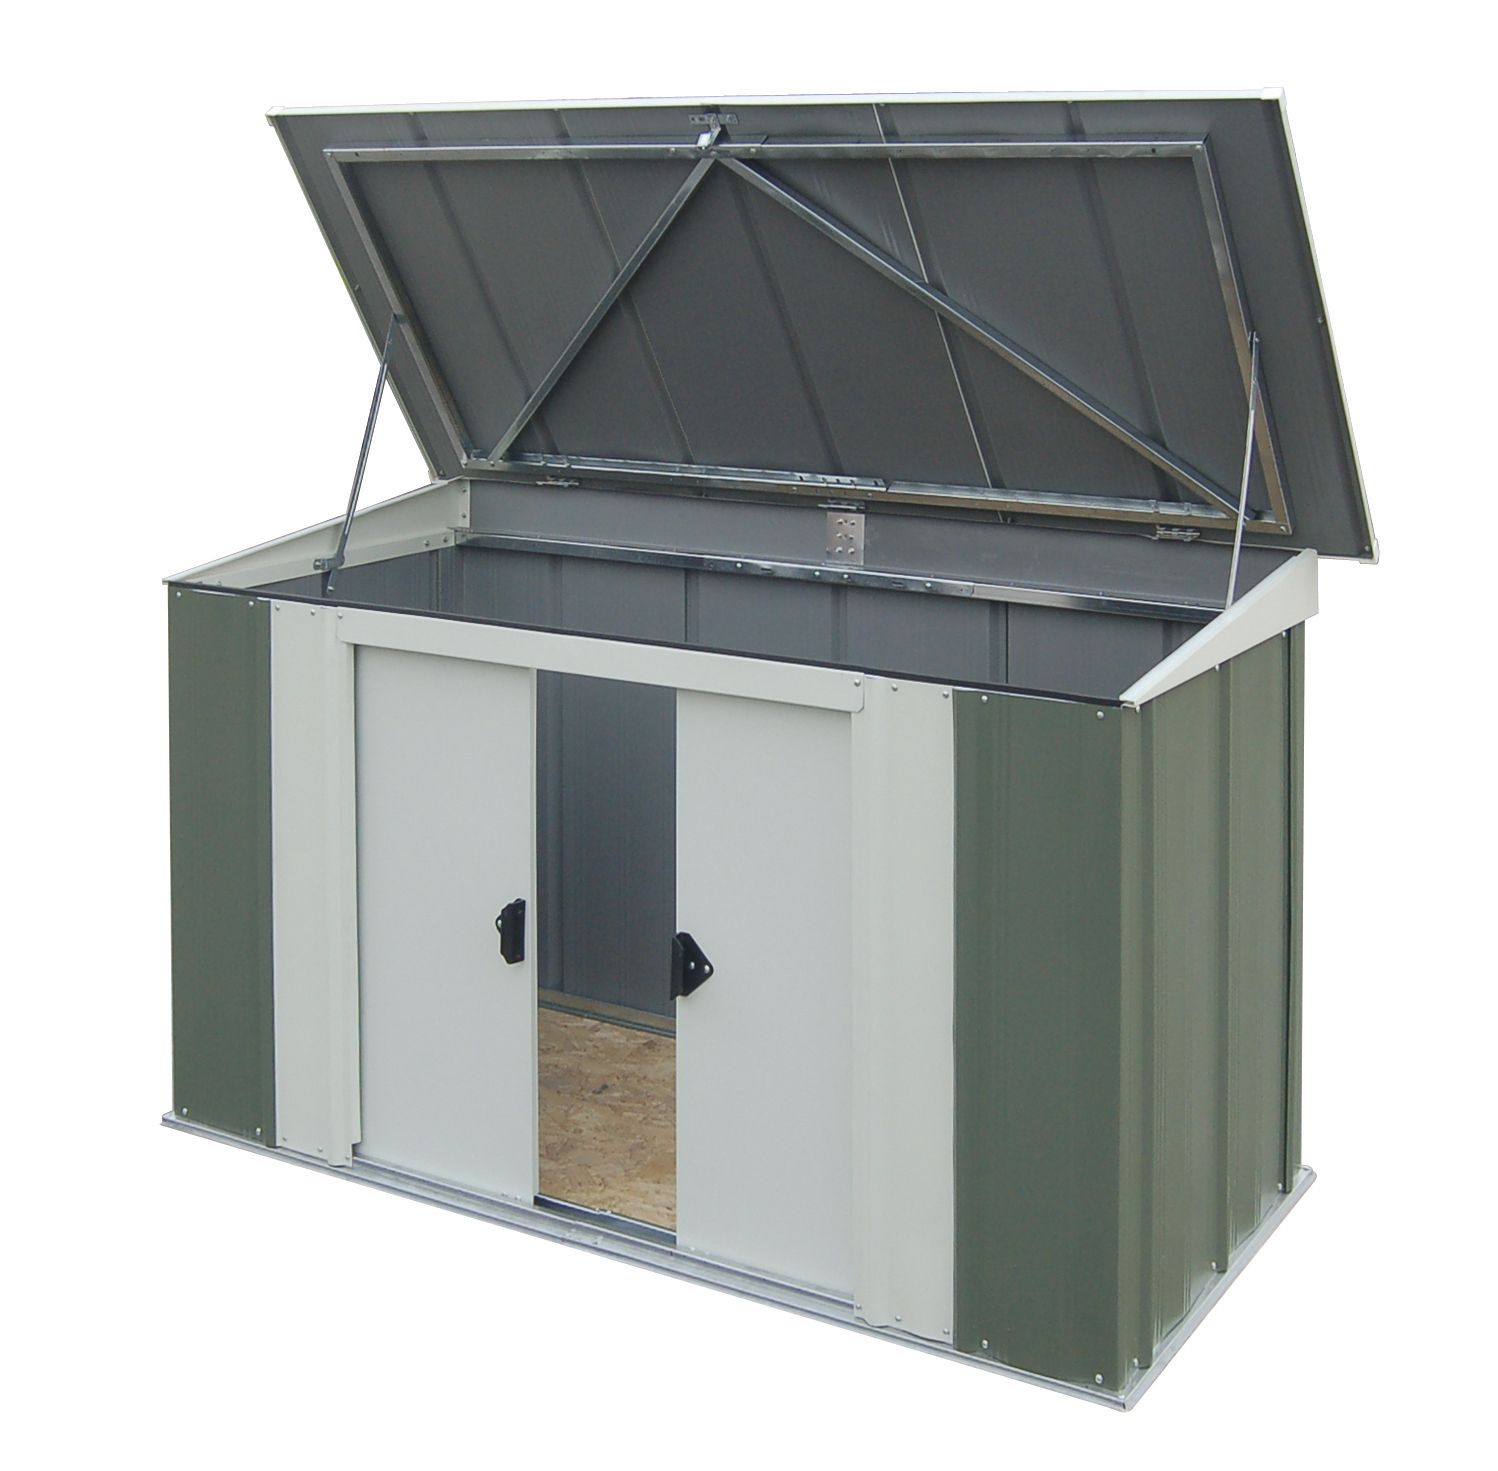 Arrow Greenvale 6x3 Pent Metal Shed - Assembly service included